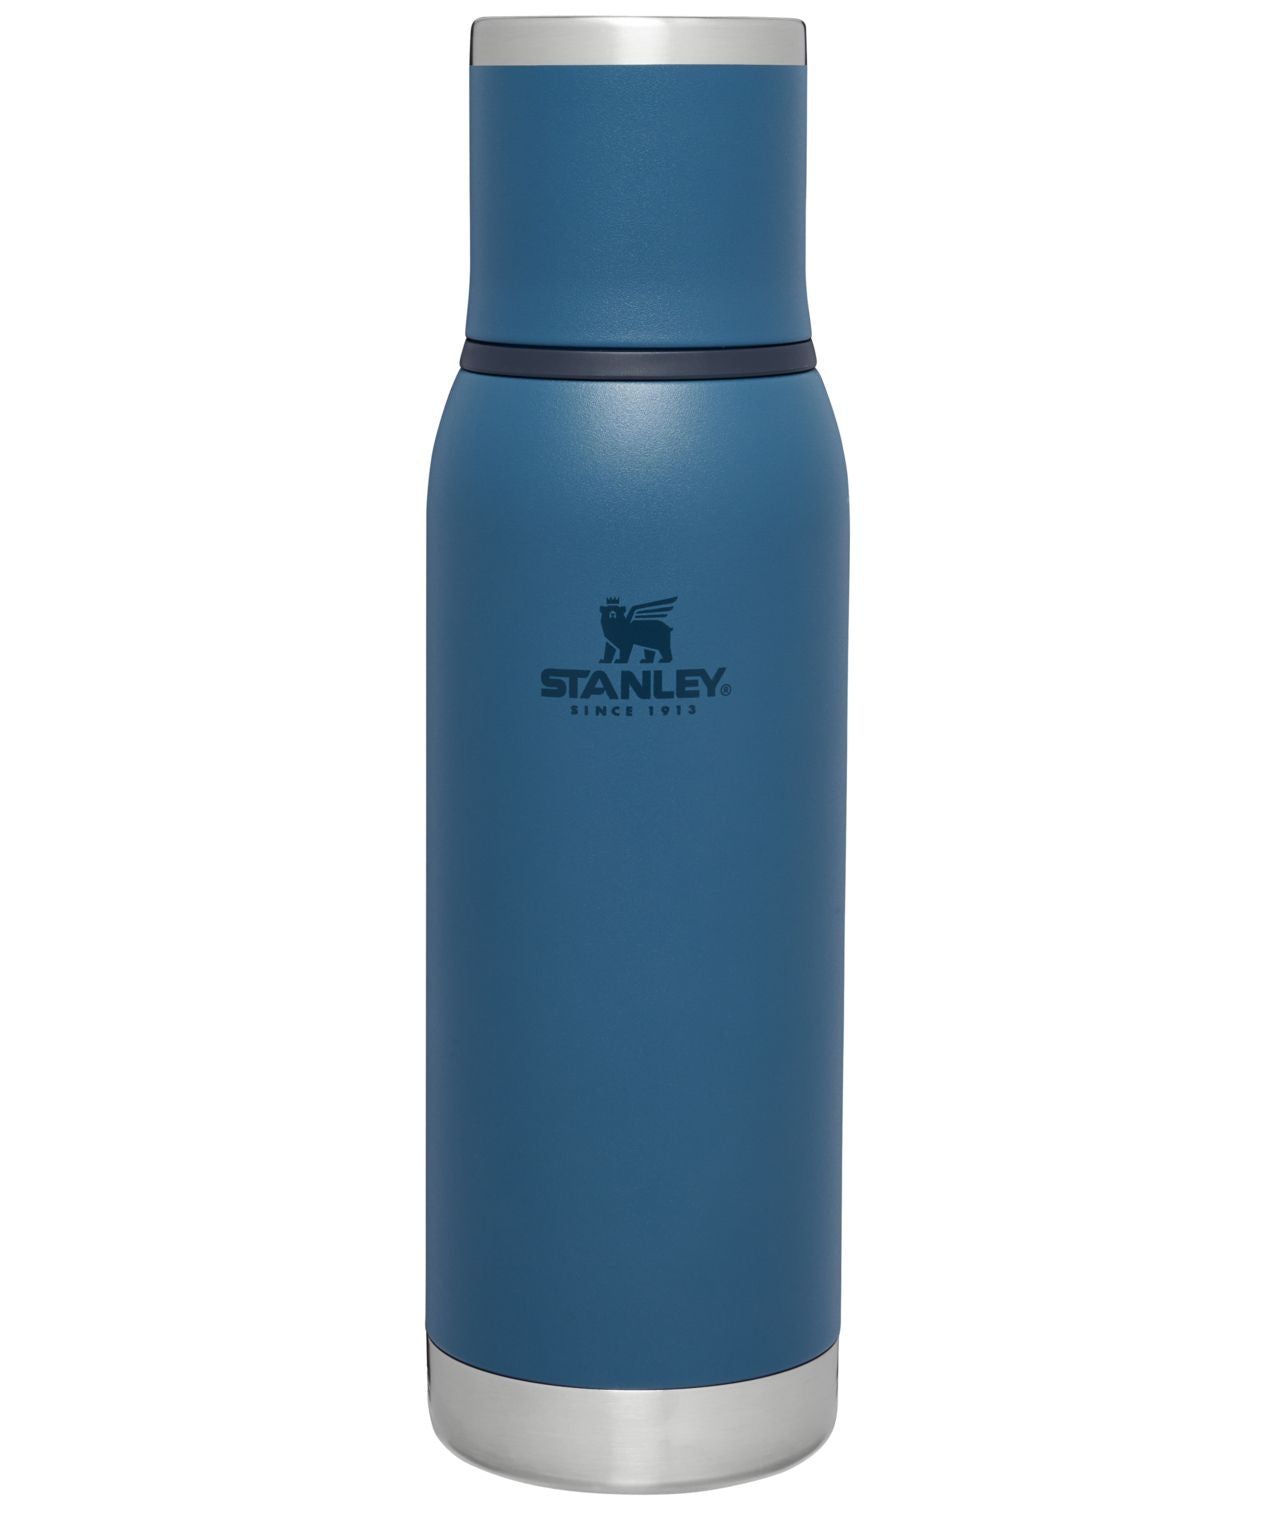 Stanley The Adventure To-Go Bottle 1 L, Black, thermos